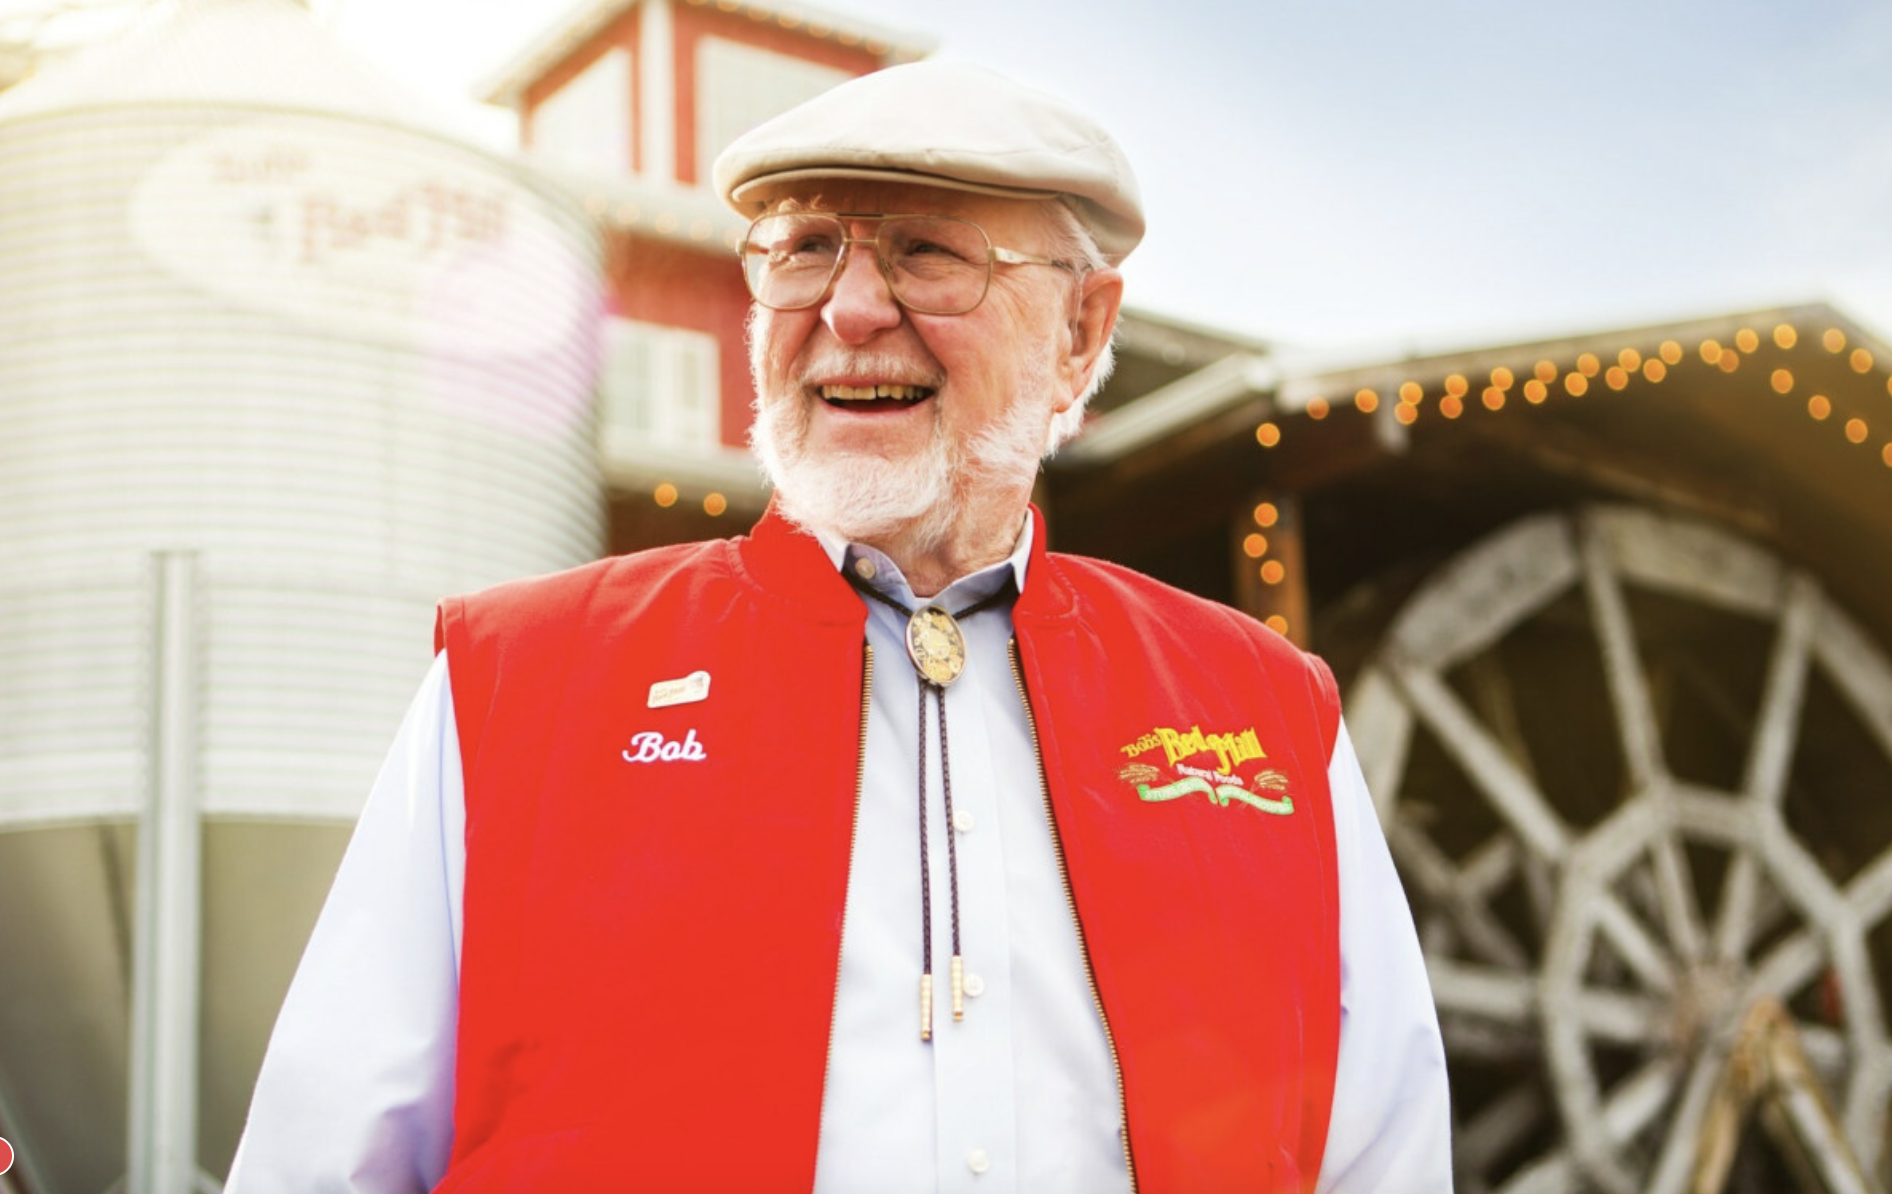 Bob Moore, the founder of Bob’s Red Mill.